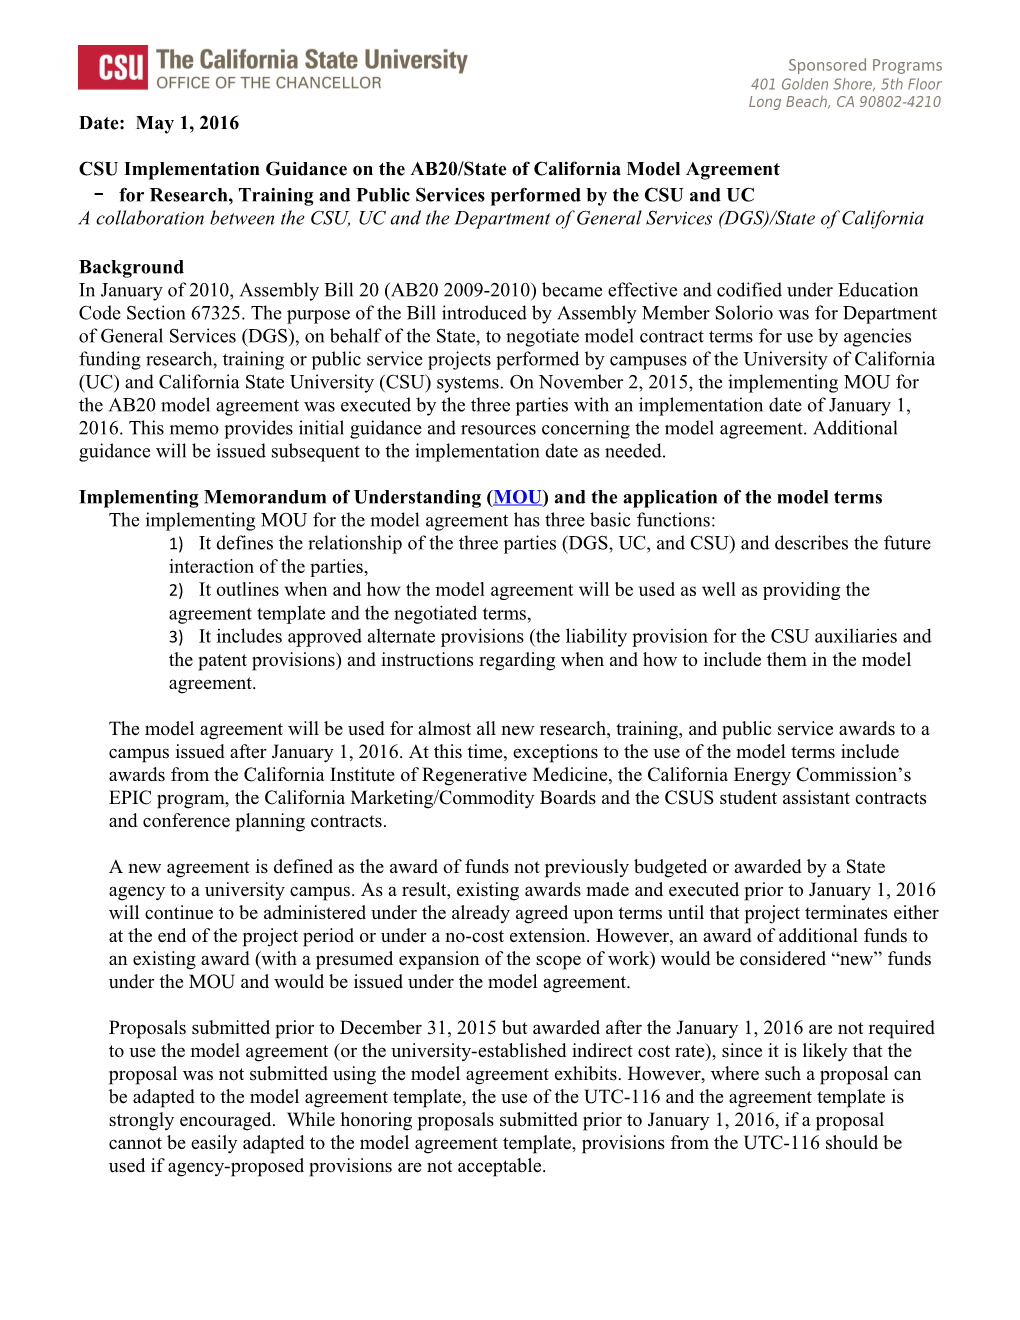 CSU Implementation of the AB20/State of California Model Agreement